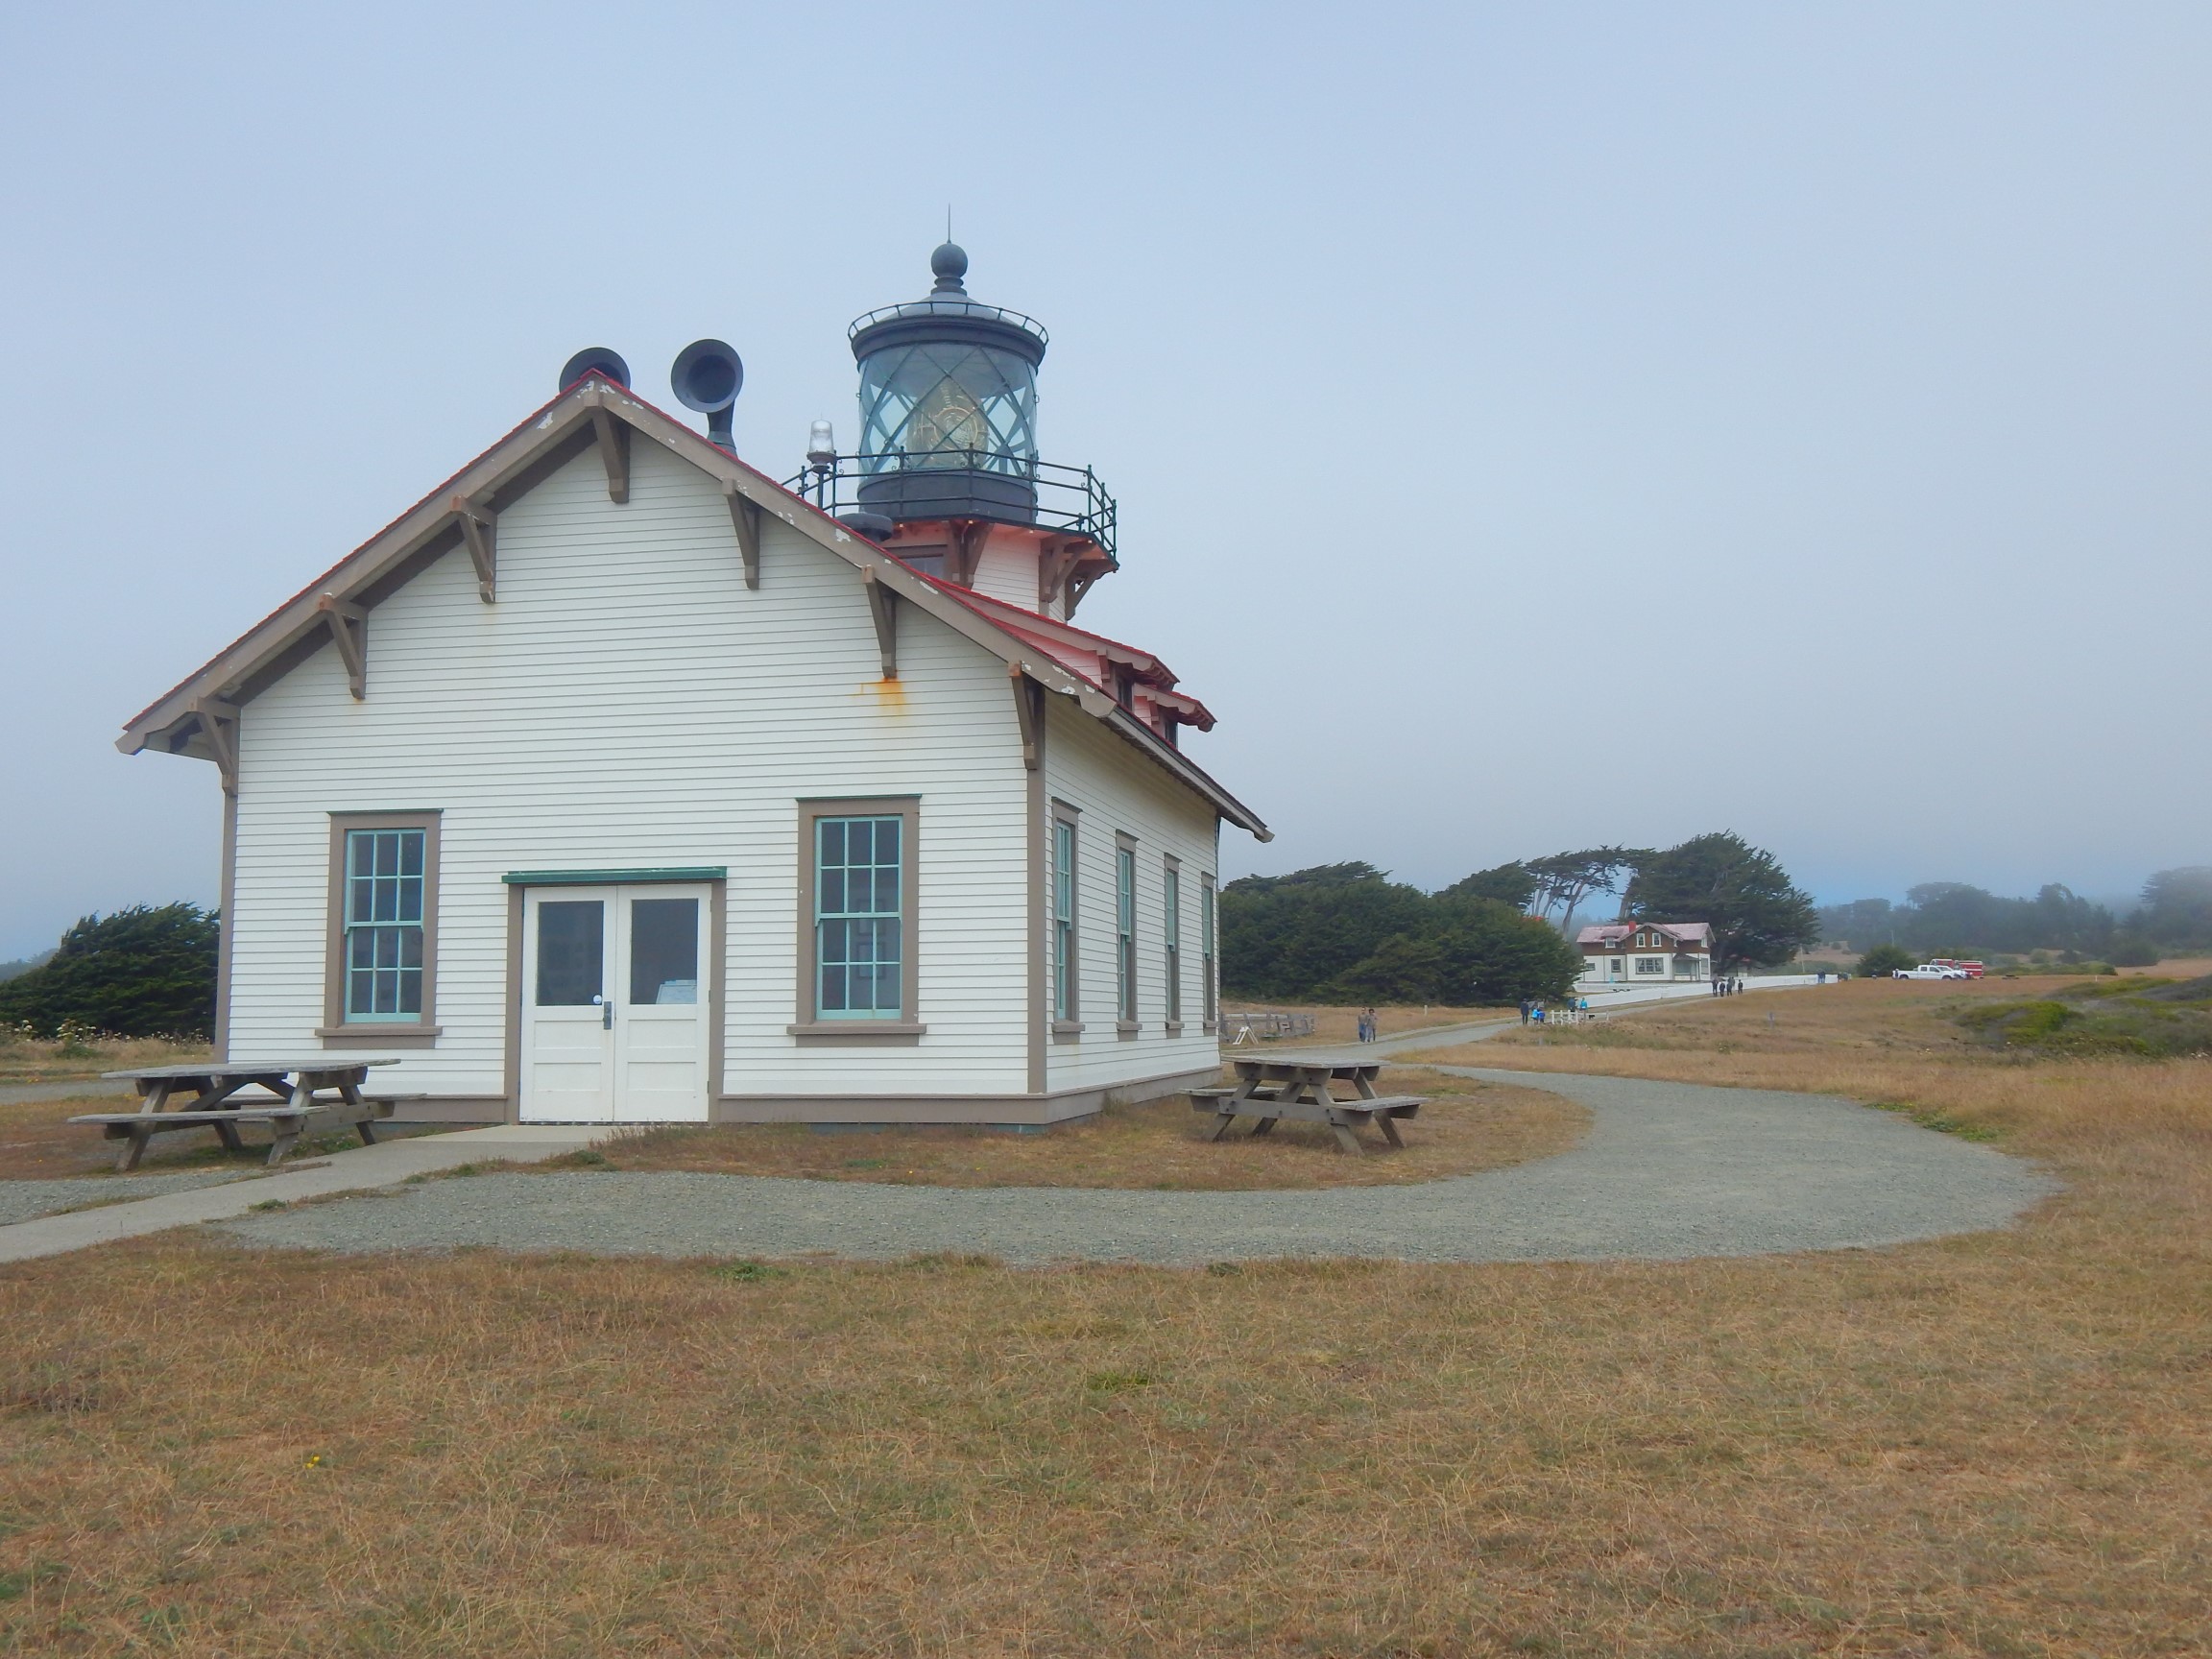 Point Carrillo Light House in Mendocino